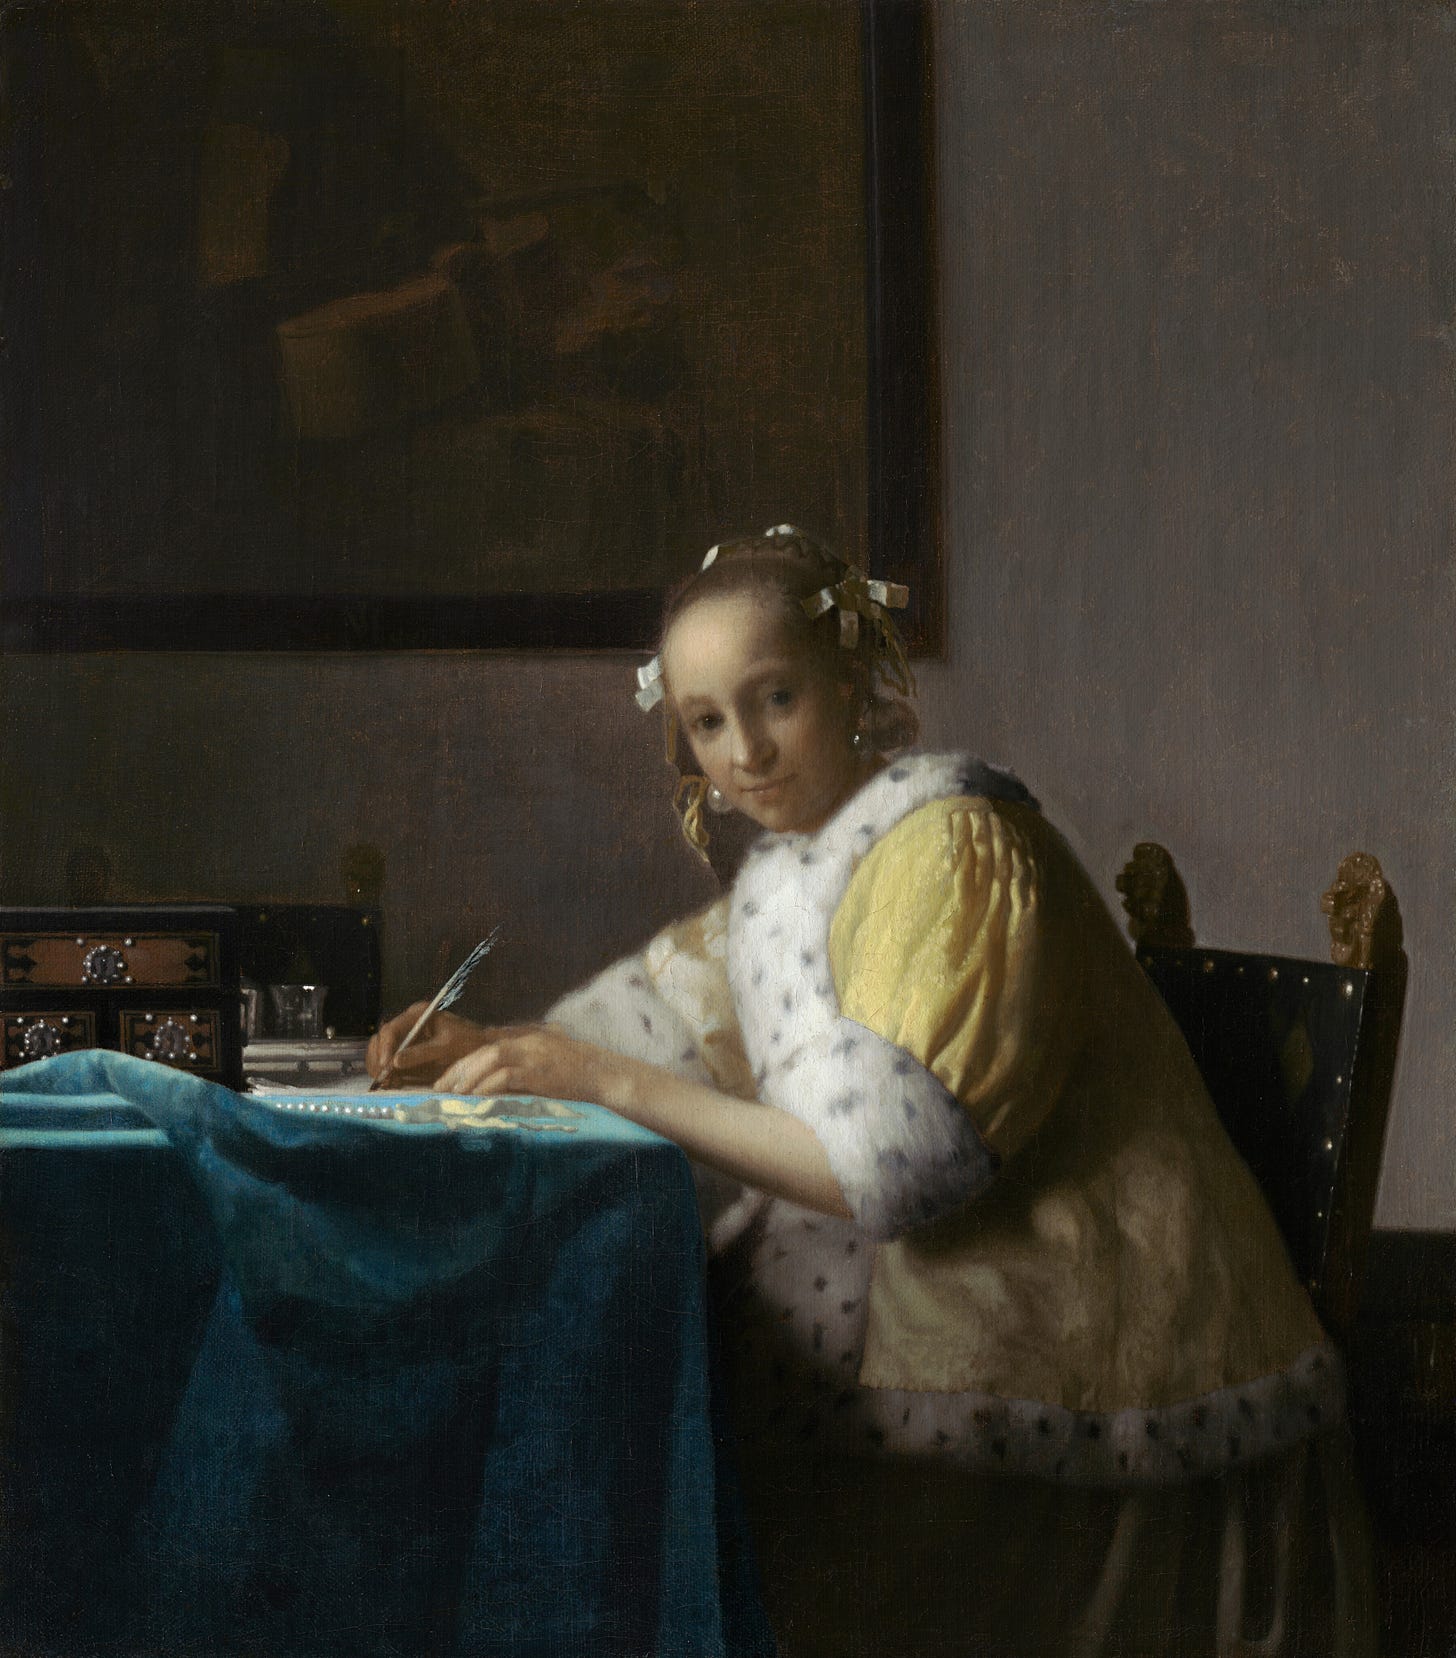 a woman with white ties in her hair wears a white and yellow frock and sits with a pen in her hand while she writes a letter at a table covered in a blue cloth